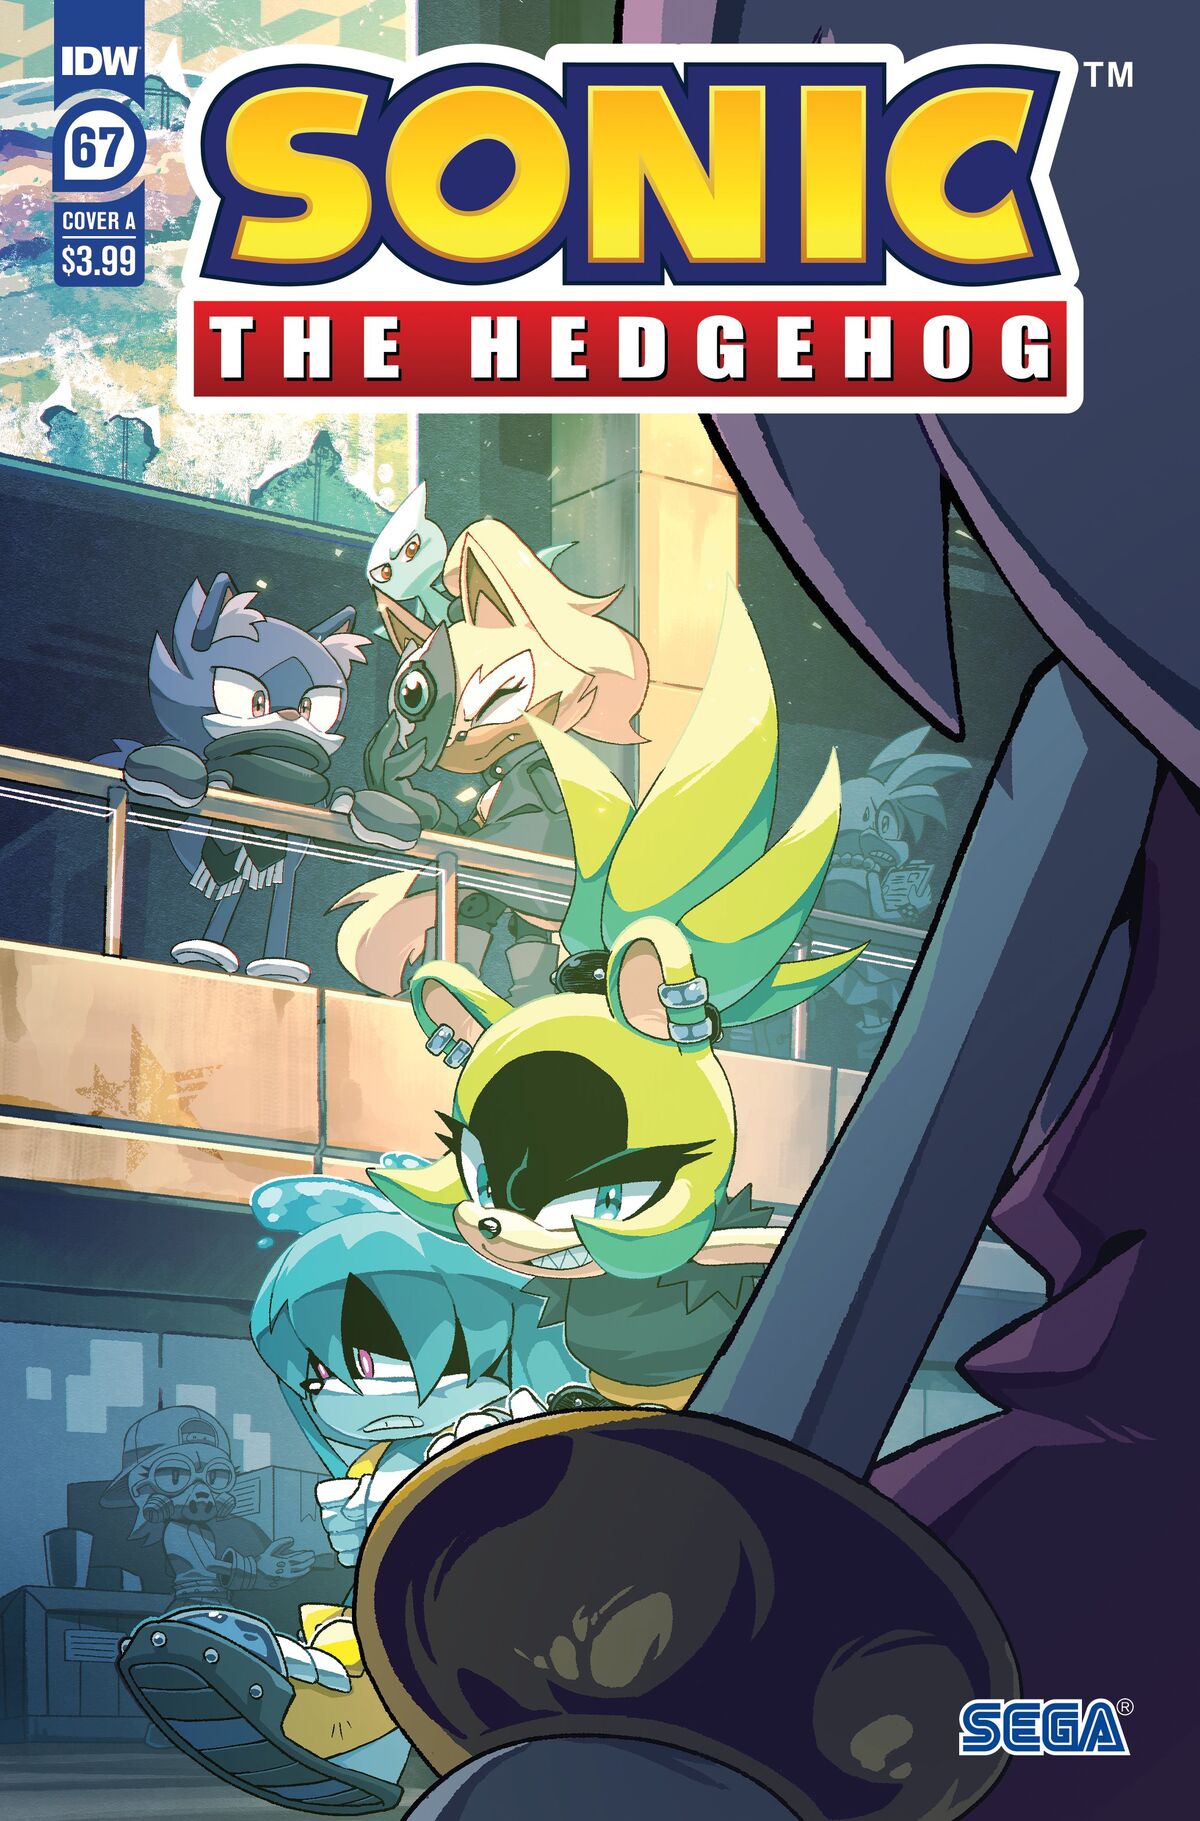 He said the thing! (Sonic IDW scrapnik island issue 4 preview) :  r/SonicTheHedgehog